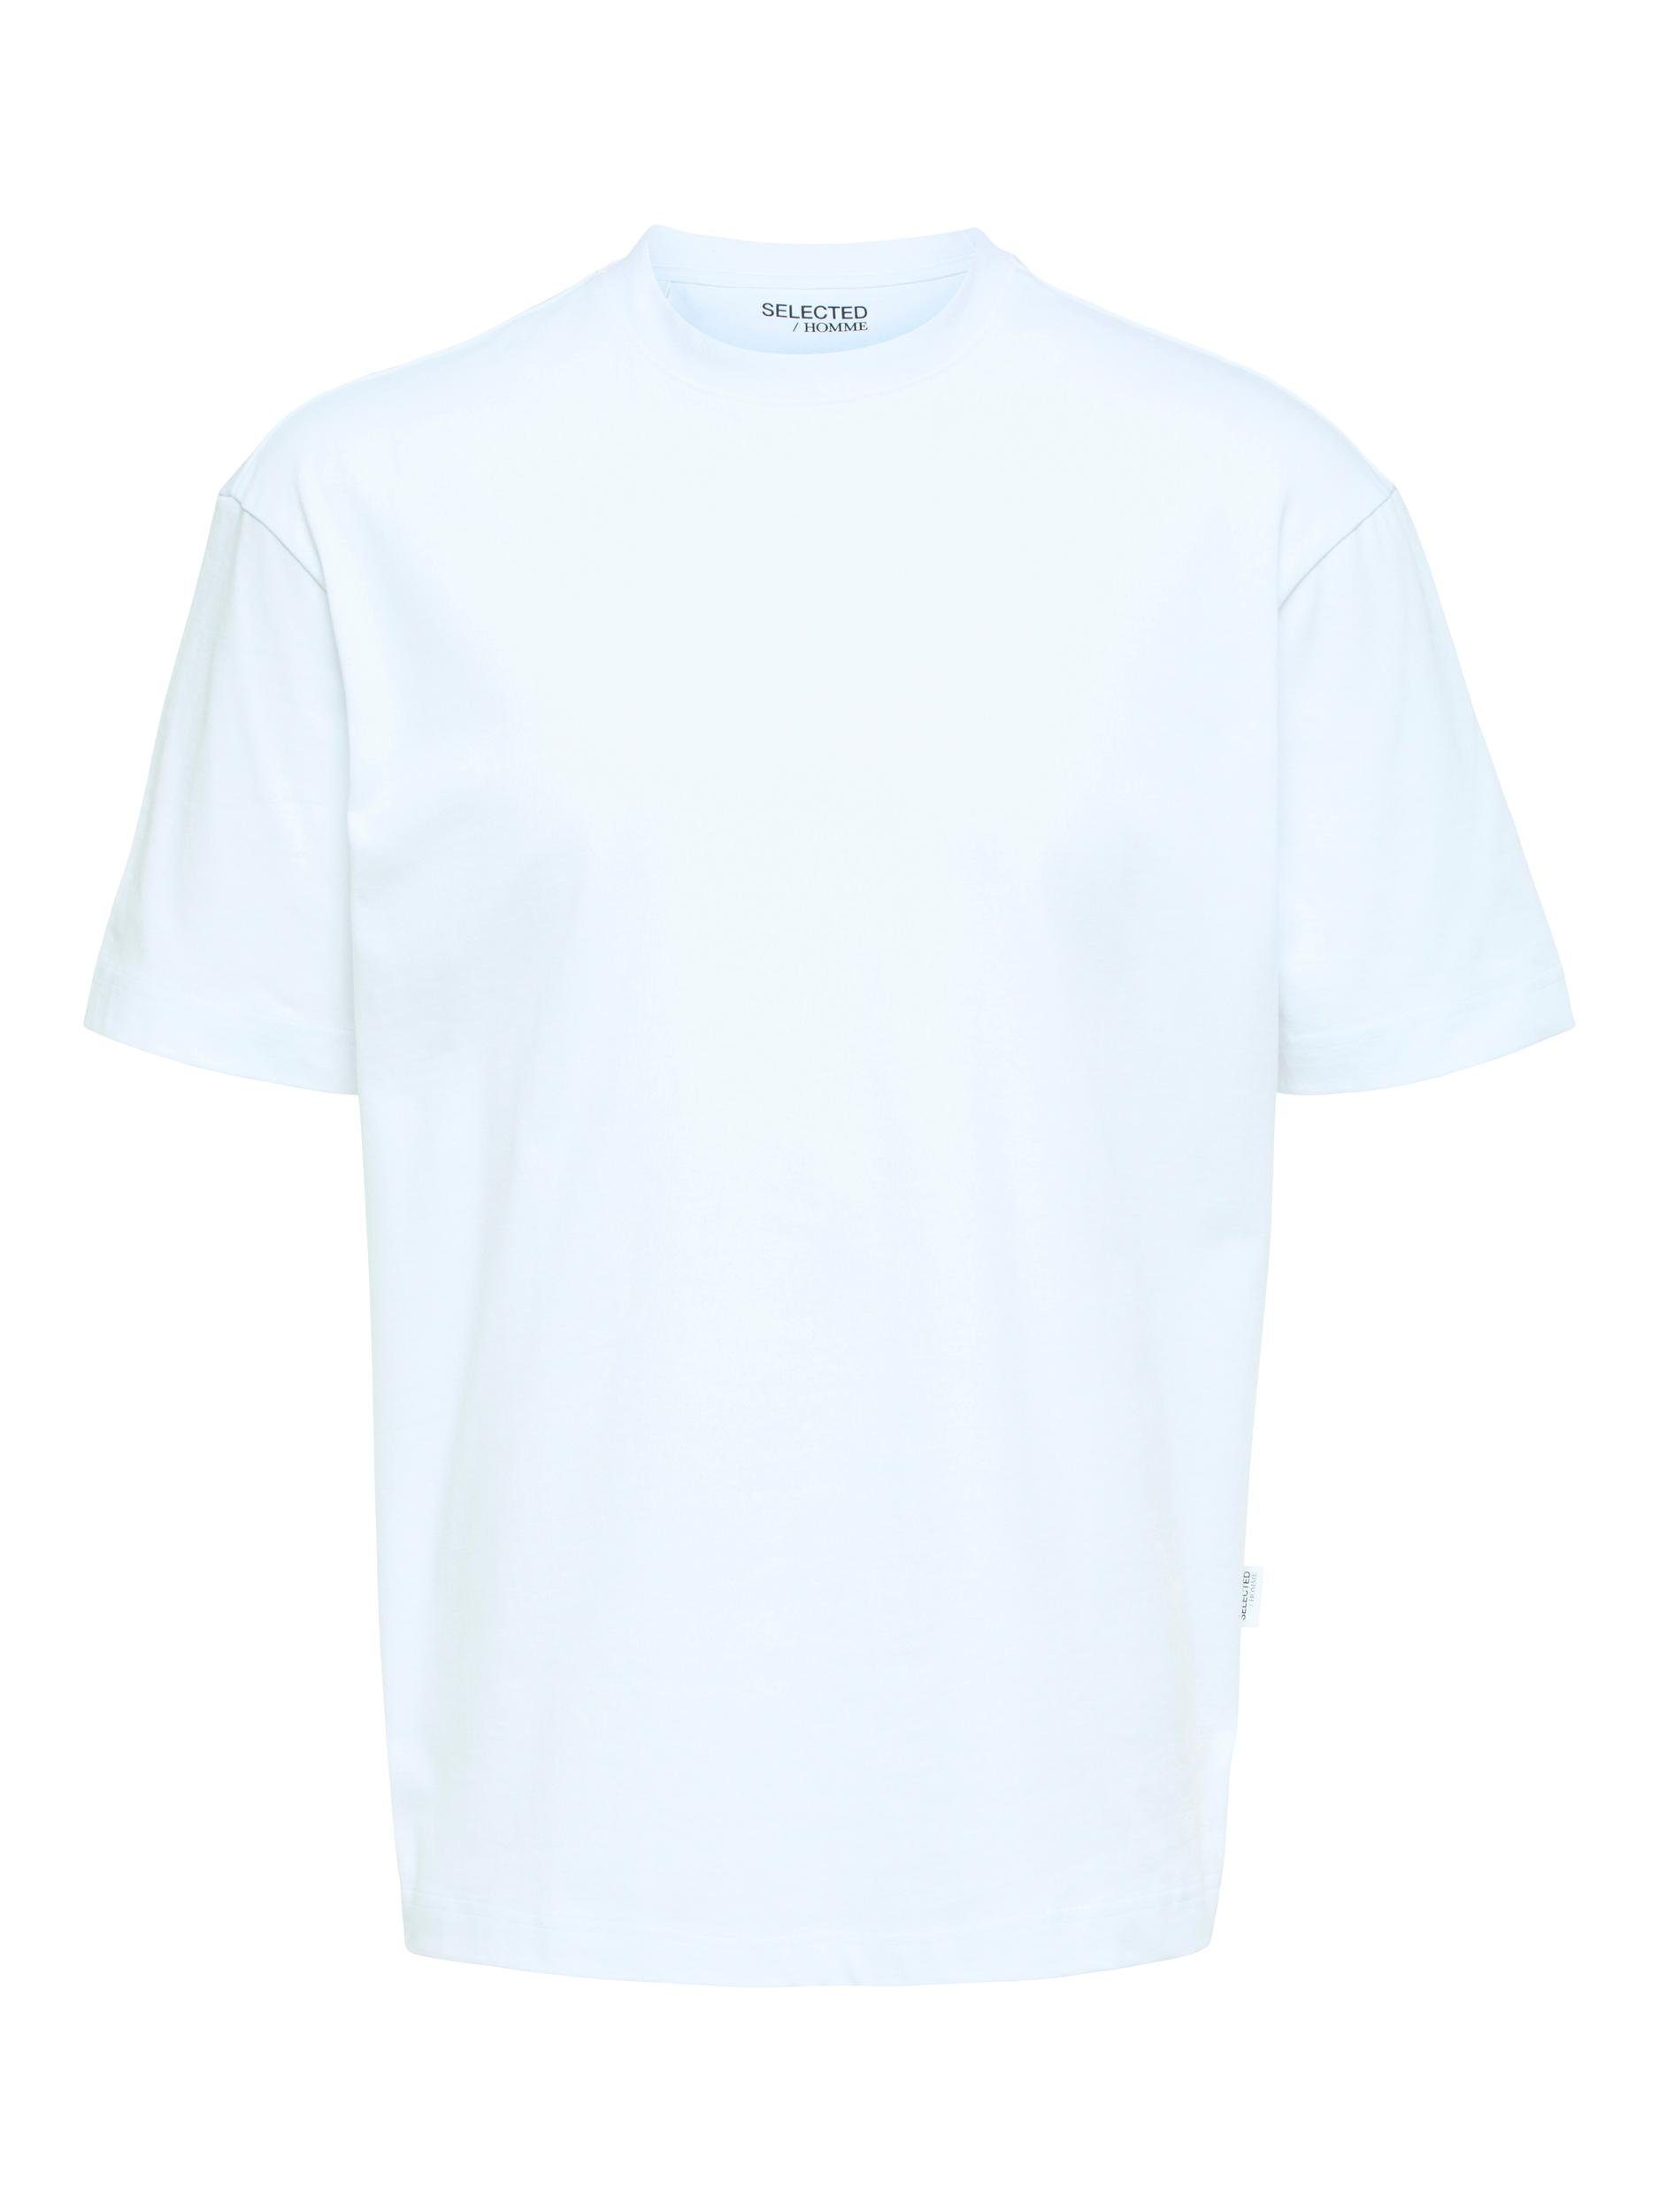 SS HOMME bright white NOOS O-NECK TEE T-Shirt SELECTED SLHLOOSETRUMAN